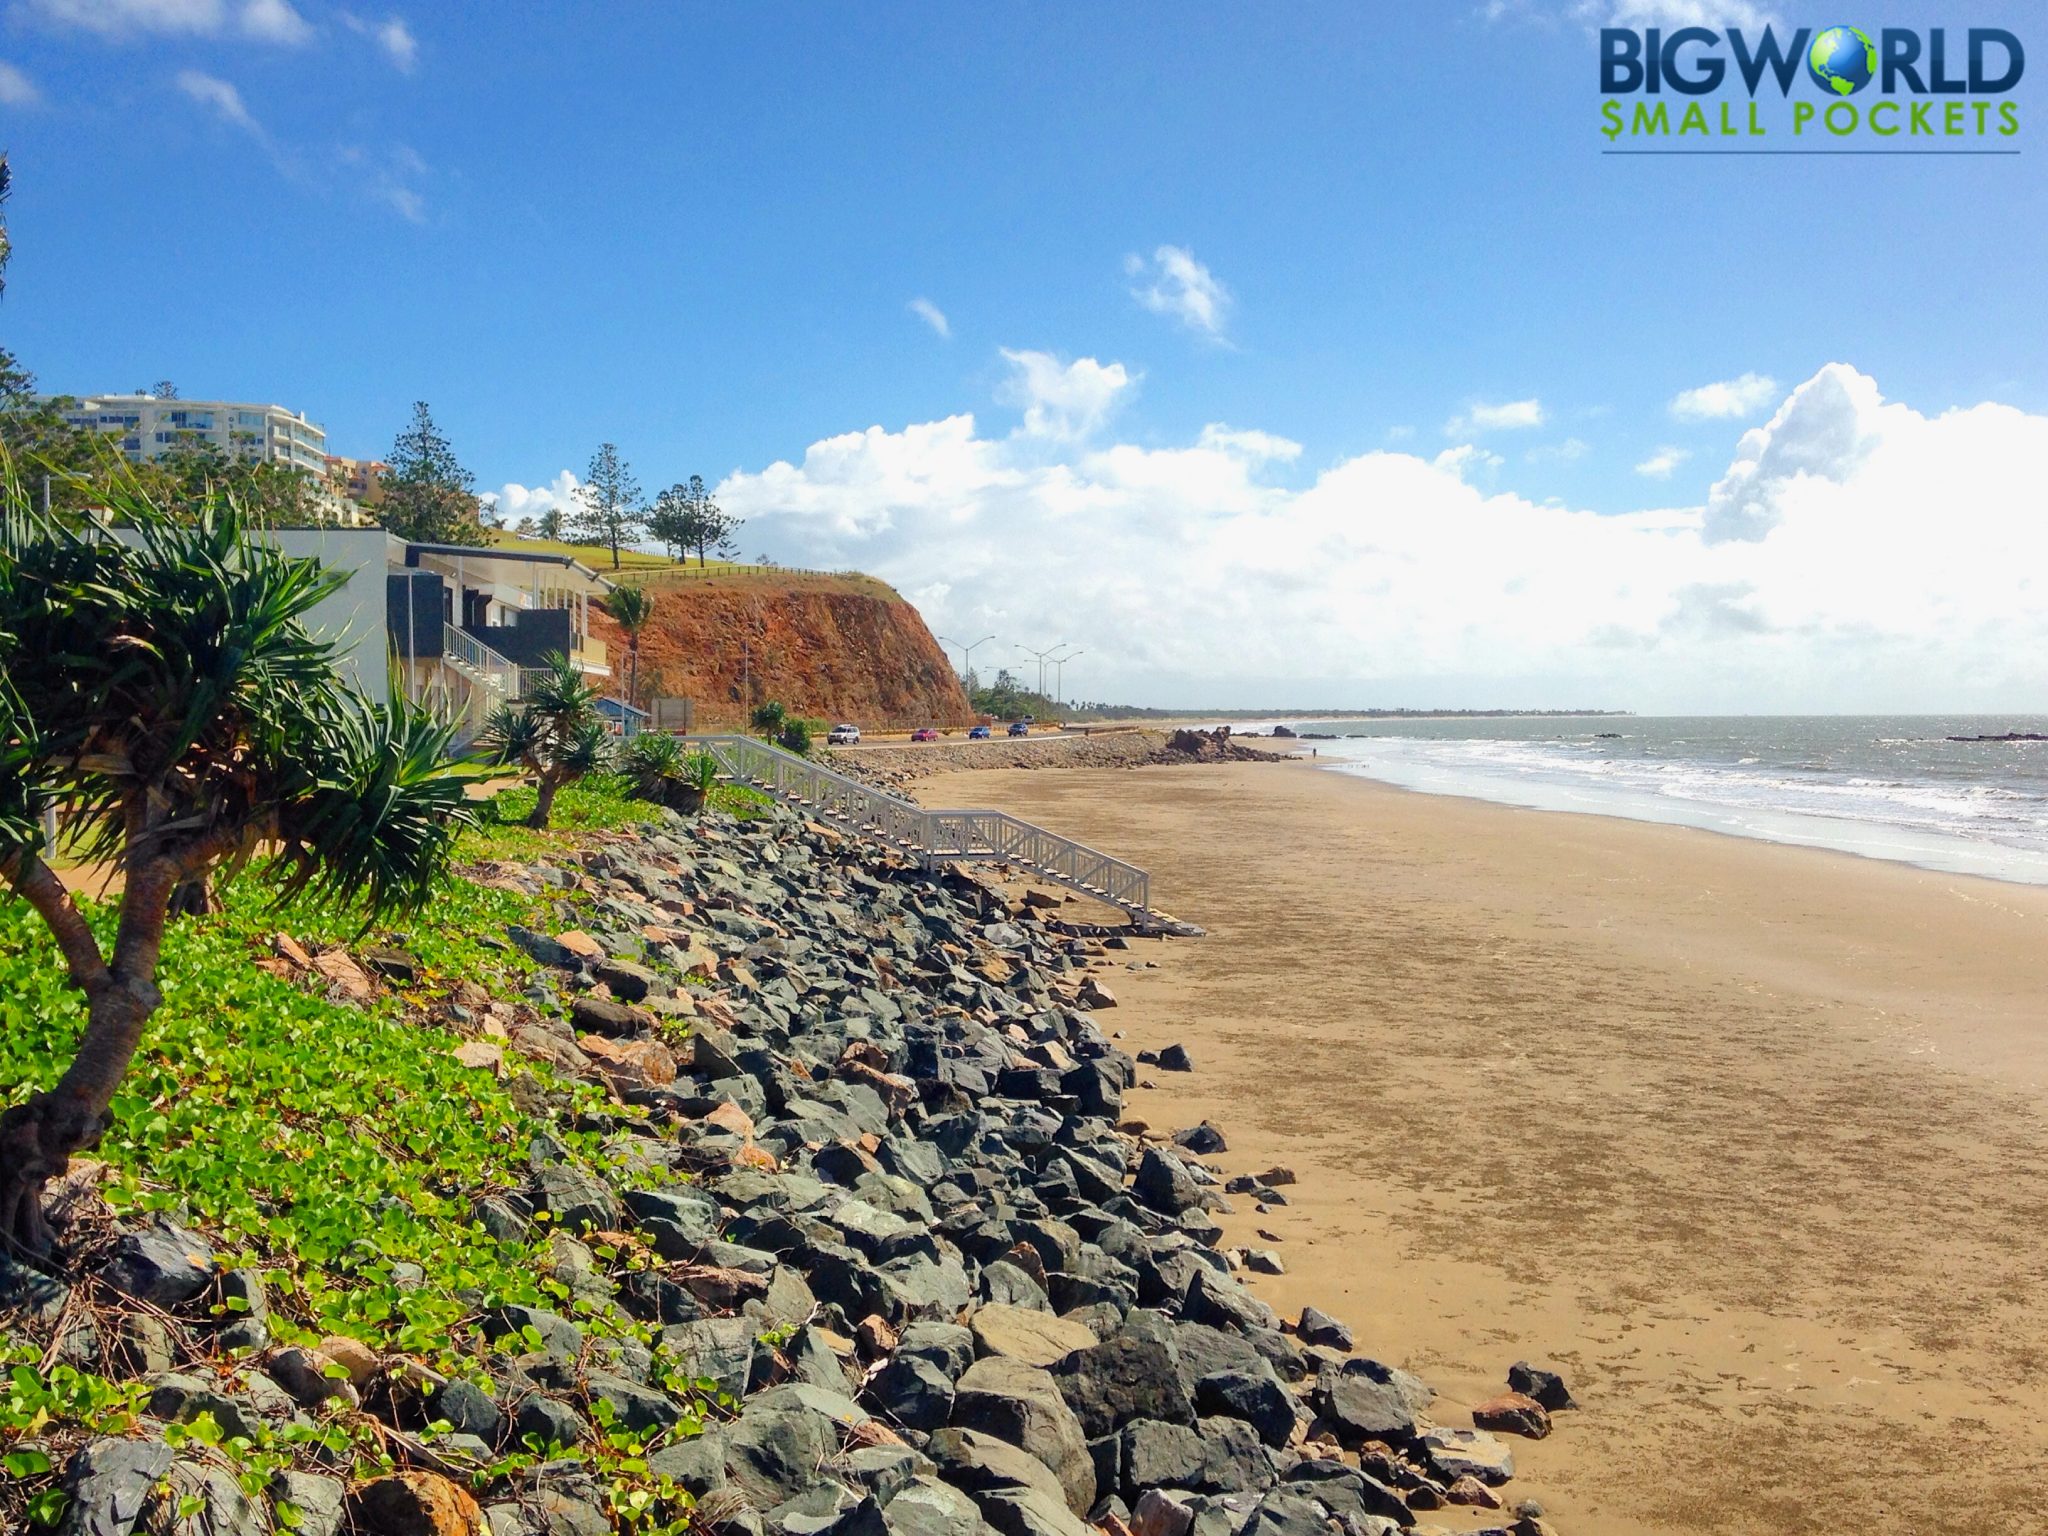 10 Best FREE Things to Do in Yeppoon, Queensland - Big World Small Pockets